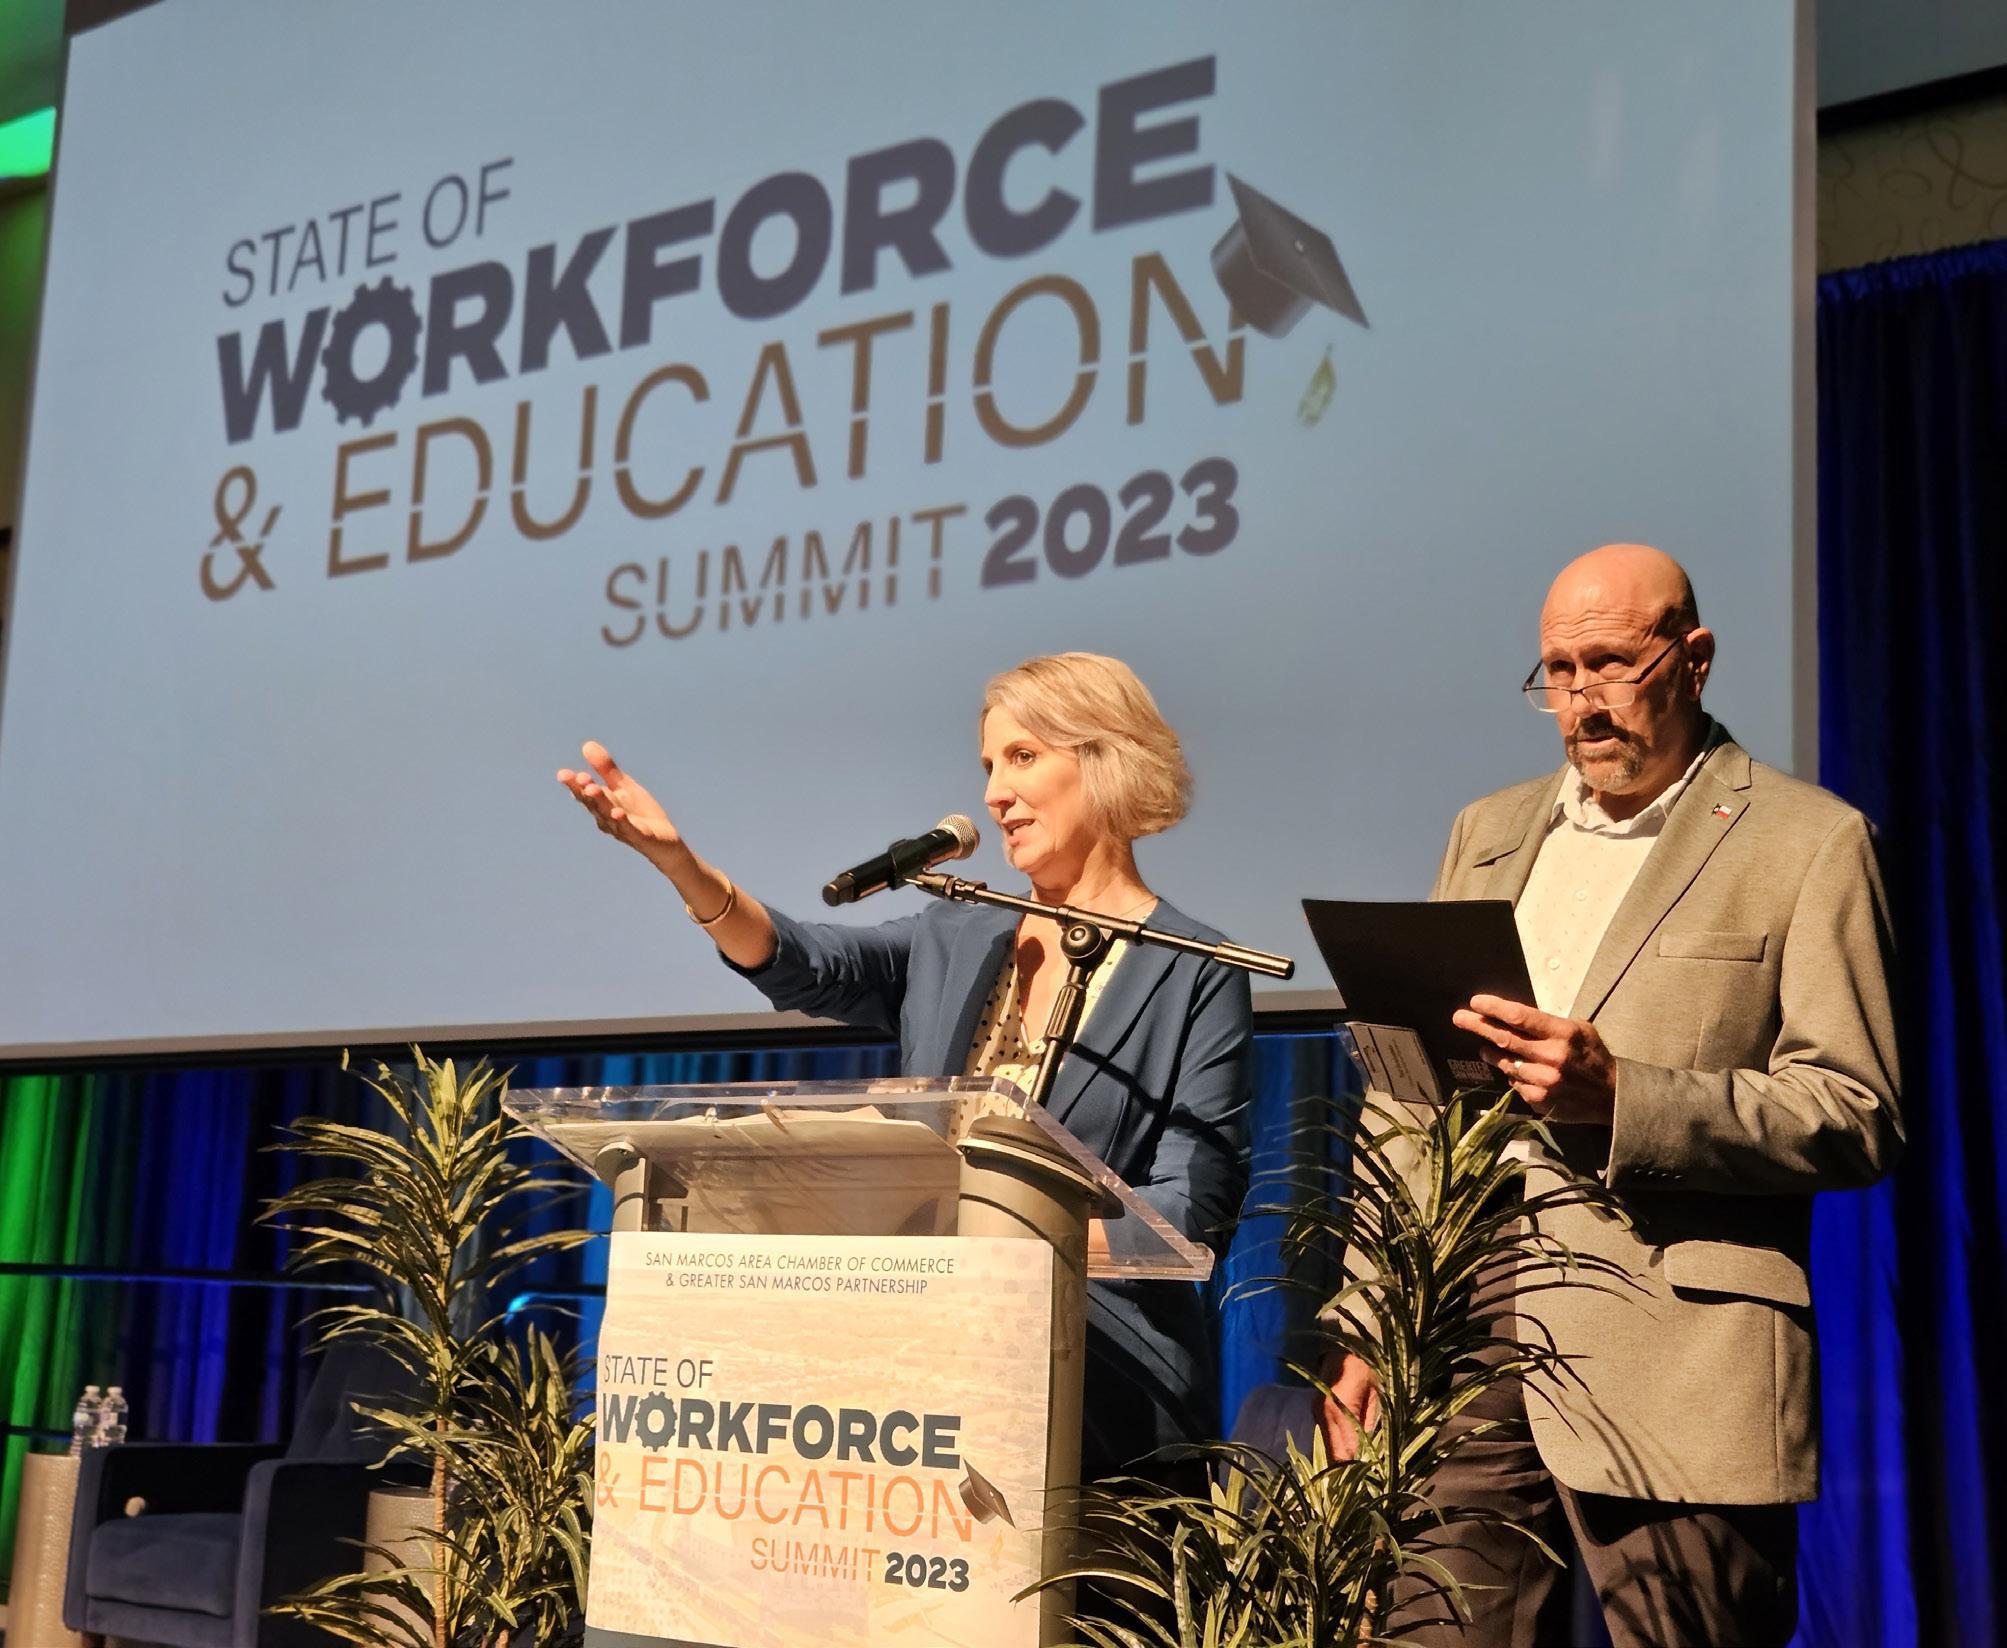 Experts weigh in on educating, training workforce